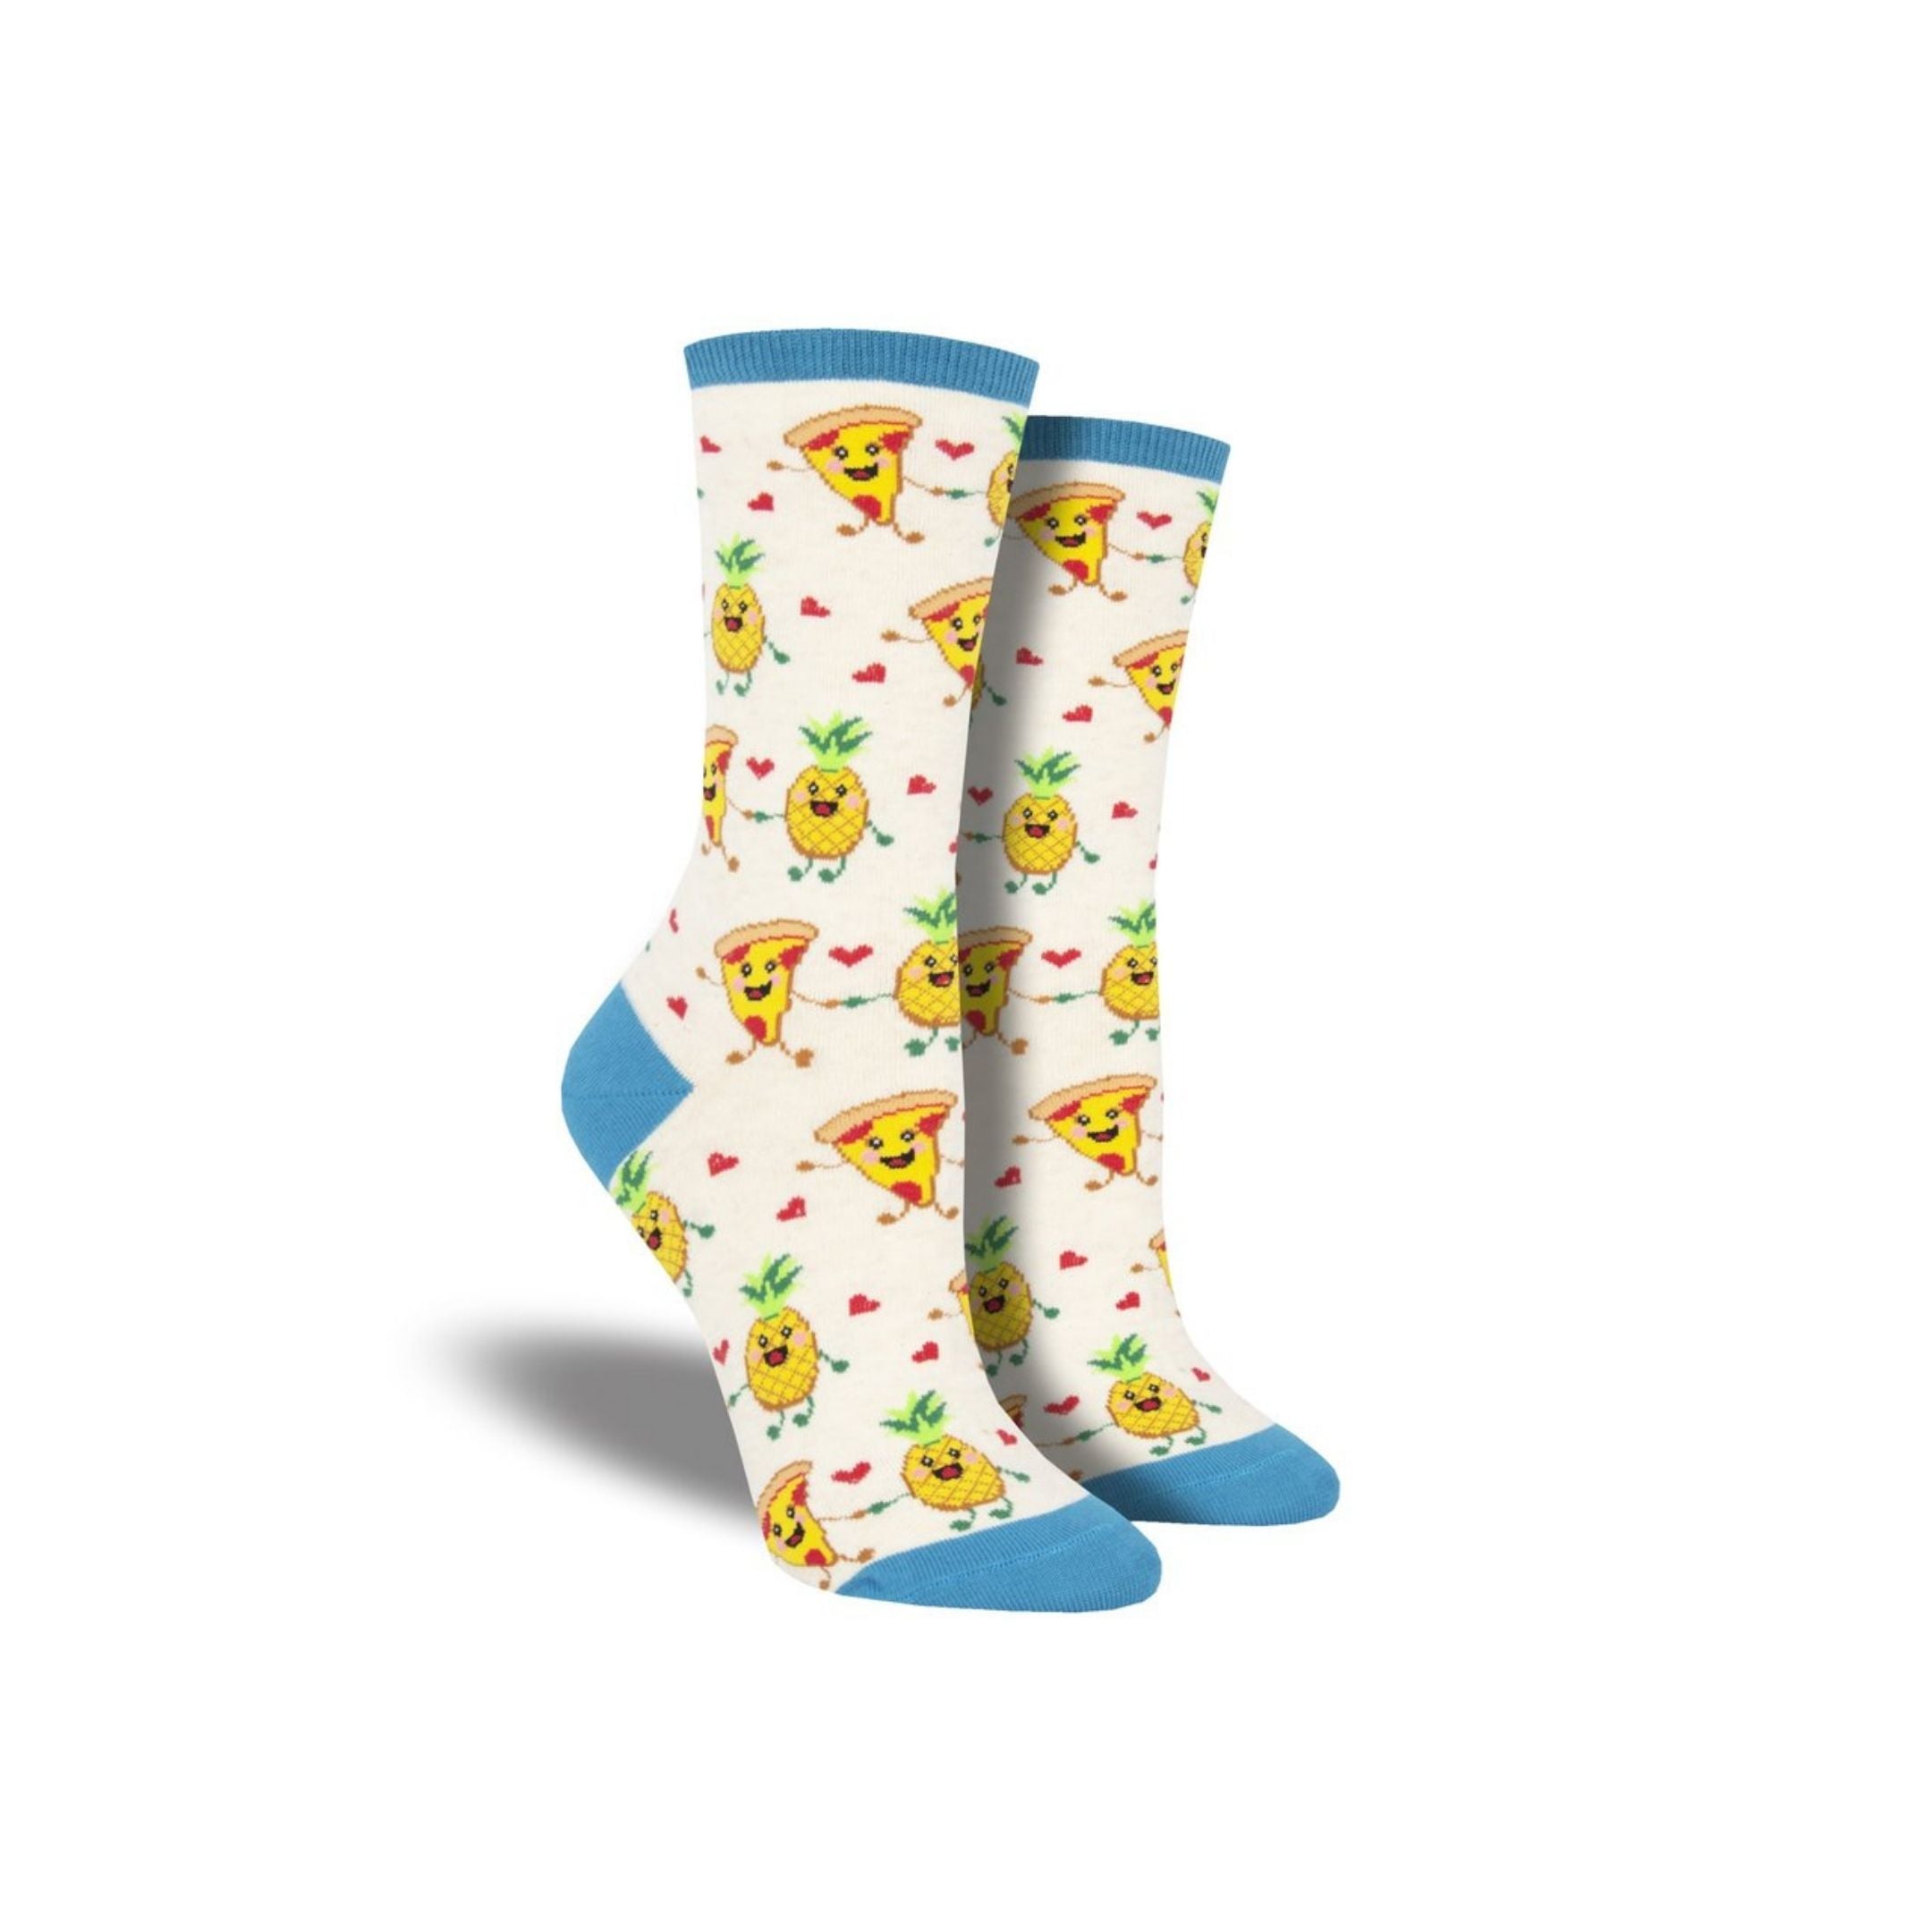 White Socks with Pizza and pineapples holding hands